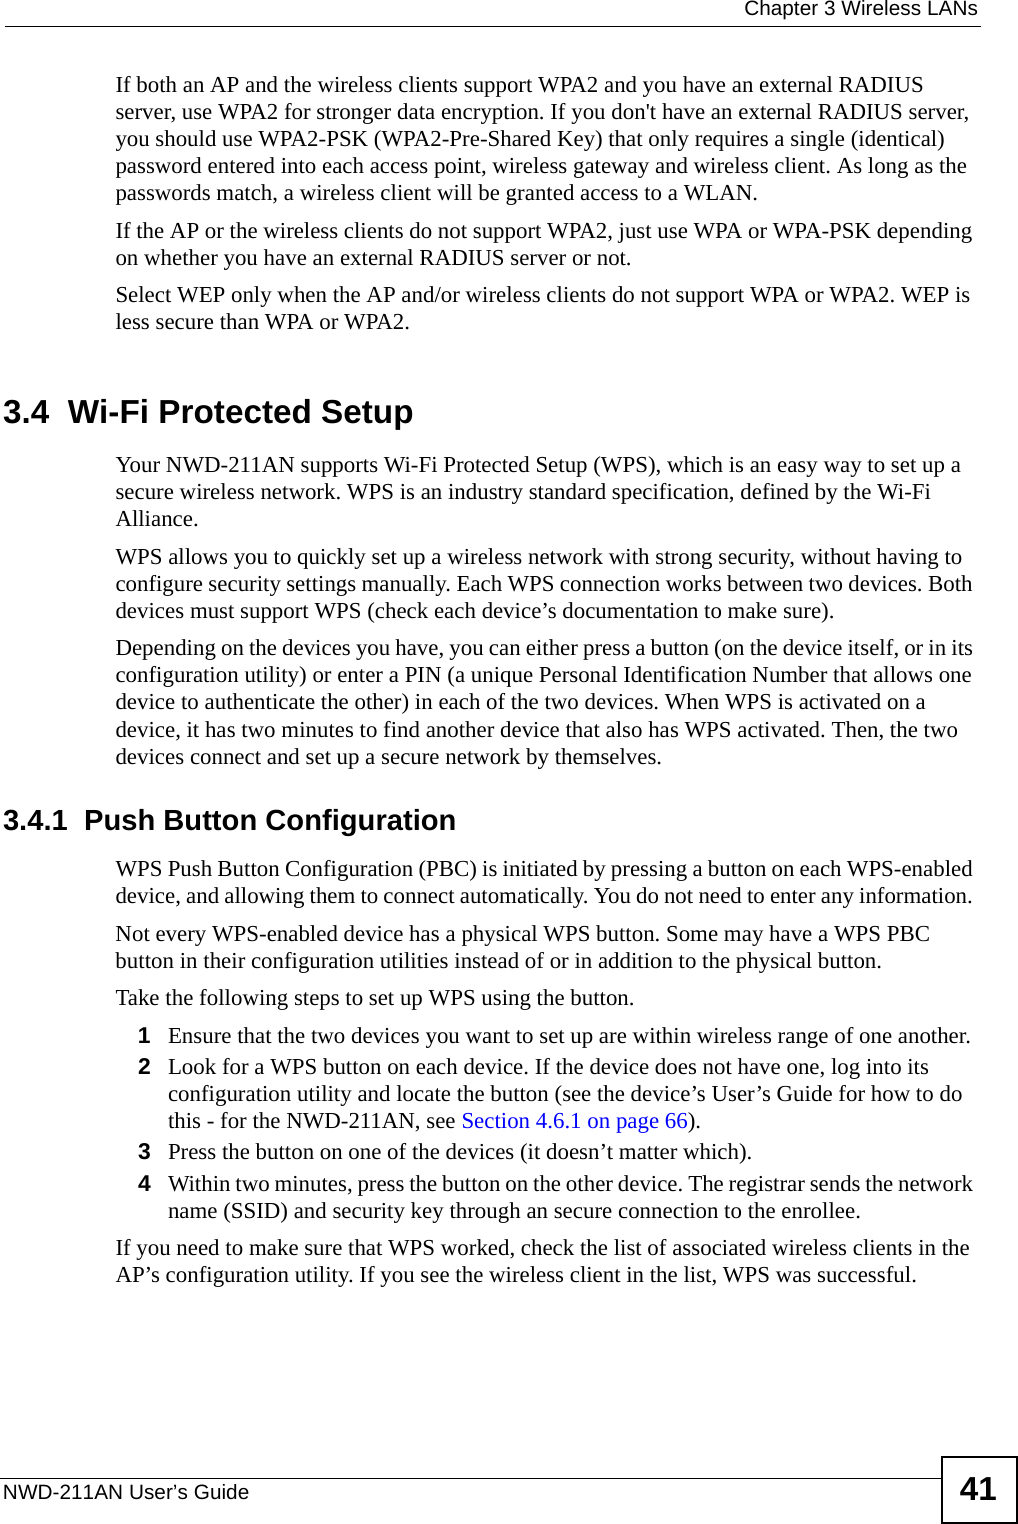  Chapter 3 Wireless LANsNWD-211AN User’s Guide 41If both an AP and the wireless clients support WPA2 and you have an external RADIUS server, use WPA2 for stronger data encryption. If you don&apos;t have an external RADIUS server, you should use WPA2-PSK (WPA2-Pre-Shared Key) that only requires a single (identical) password entered into each access point, wireless gateway and wireless client. As long as the passwords match, a wireless client will be granted access to a WLAN. If the AP or the wireless clients do not support WPA2, just use WPA or WPA-PSK depending on whether you have an external RADIUS server or not.Select WEP only when the AP and/or wireless clients do not support WPA or WPA2. WEP is less secure than WPA or WPA2.3.4  Wi-Fi Protected SetupYour NWD-211AN supports Wi-Fi Protected Setup (WPS), which is an easy way to set up a secure wireless network. WPS is an industry standard specification, defined by the Wi-Fi Alliance.WPS allows you to quickly set up a wireless network with strong security, without having to configure security settings manually. Each WPS connection works between two devices. Both devices must support WPS (check each device’s documentation to make sure). Depending on the devices you have, you can either press a button (on the device itself, or in its configuration utility) or enter a PIN (a unique Personal Identification Number that allows one device to authenticate the other) in each of the two devices. When WPS is activated on a device, it has two minutes to find another device that also has WPS activated. Then, the two devices connect and set up a secure network by themselves.3.4.1  Push Button ConfigurationWPS Push Button Configuration (PBC) is initiated by pressing a button on each WPS-enabled device, and allowing them to connect automatically. You do not need to enter any information. Not every WPS-enabled device has a physical WPS button. Some may have a WPS PBC button in their configuration utilities instead of or in addition to the physical button.Take the following steps to set up WPS using the button.1Ensure that the two devices you want to set up are within wireless range of one another. 2Look for a WPS button on each device. If the device does not have one, log into its configuration utility and locate the button (see the device’s User’s Guide for how to do this - for the NWD-211AN, see Section 4.6.1 on page 66).3Press the button on one of the devices (it doesn’t matter which).4Within two minutes, press the button on the other device. The registrar sends the network name (SSID) and security key through an secure connection to the enrollee.If you need to make sure that WPS worked, check the list of associated wireless clients in the AP’s configuration utility. If you see the wireless client in the list, WPS was successful.